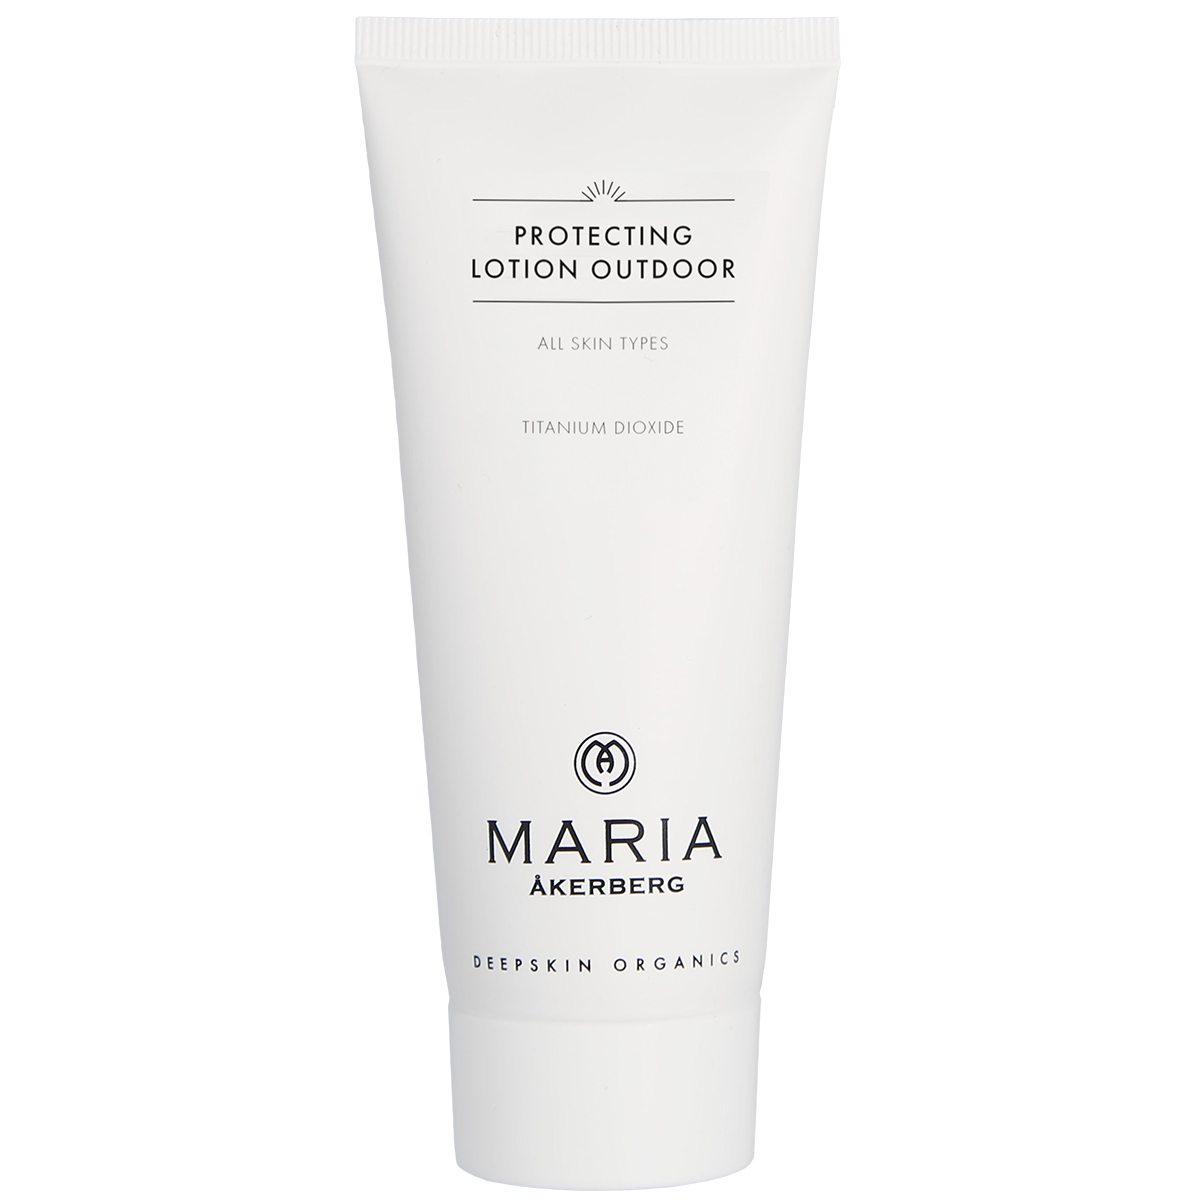 Maria Åkerberg Protecting Lotion Outdoor